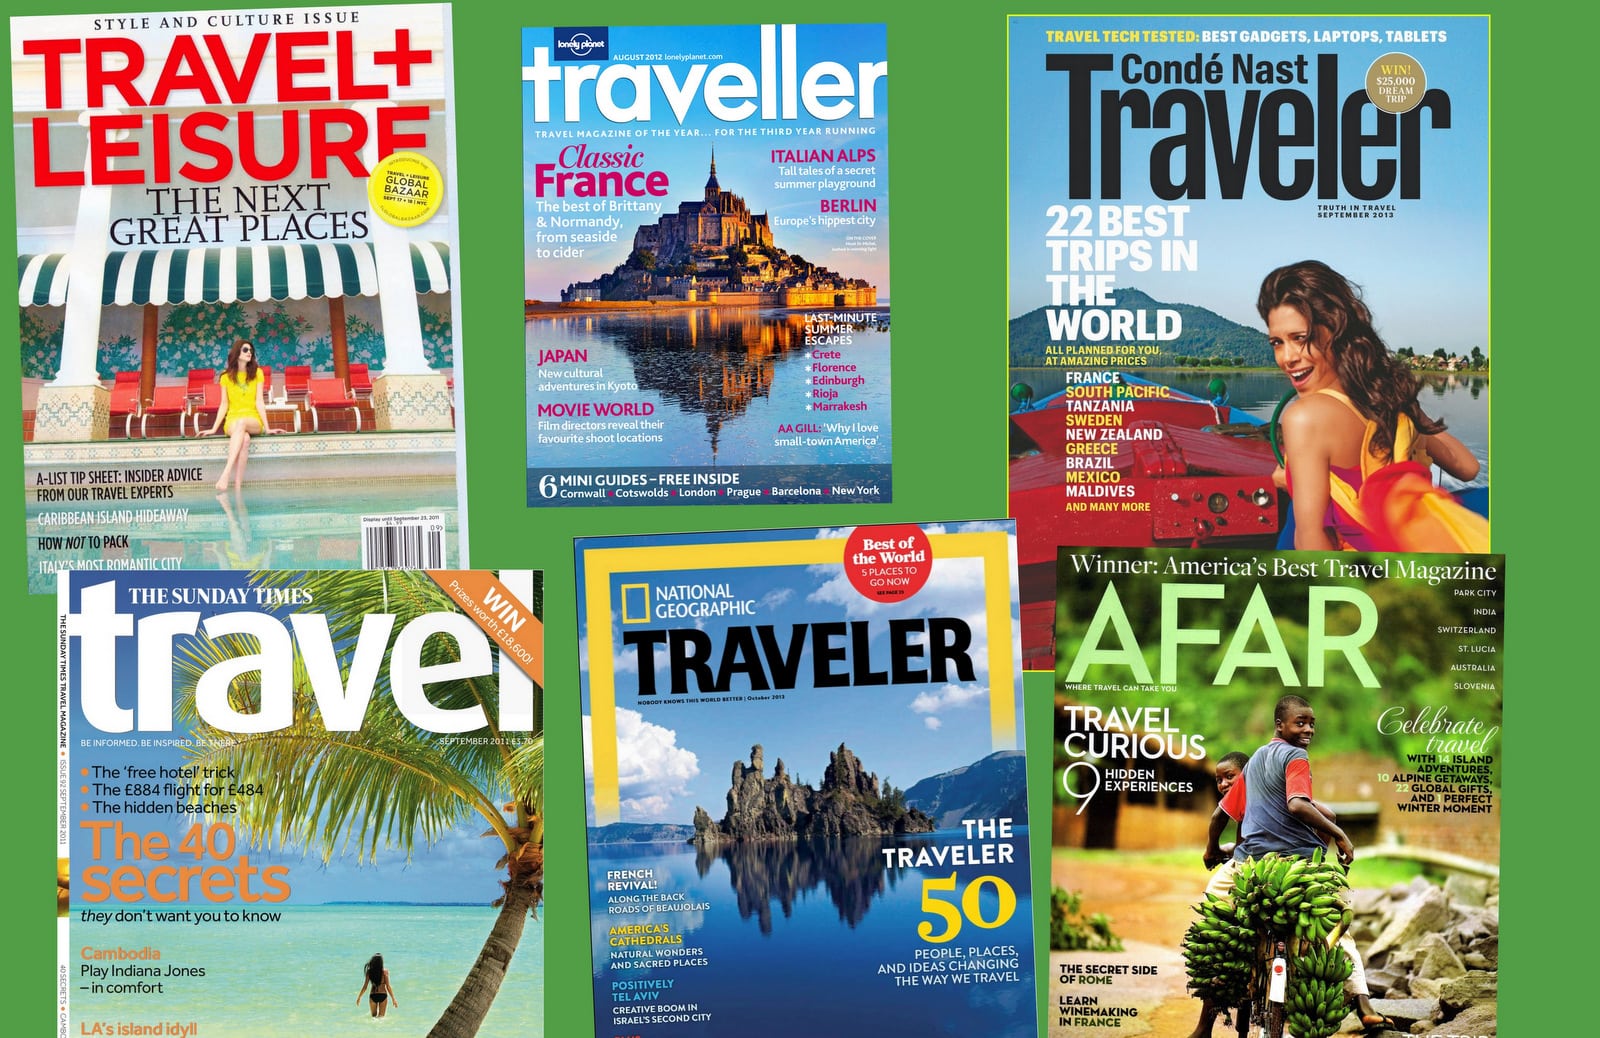 So much for the primacy of travel magazines.